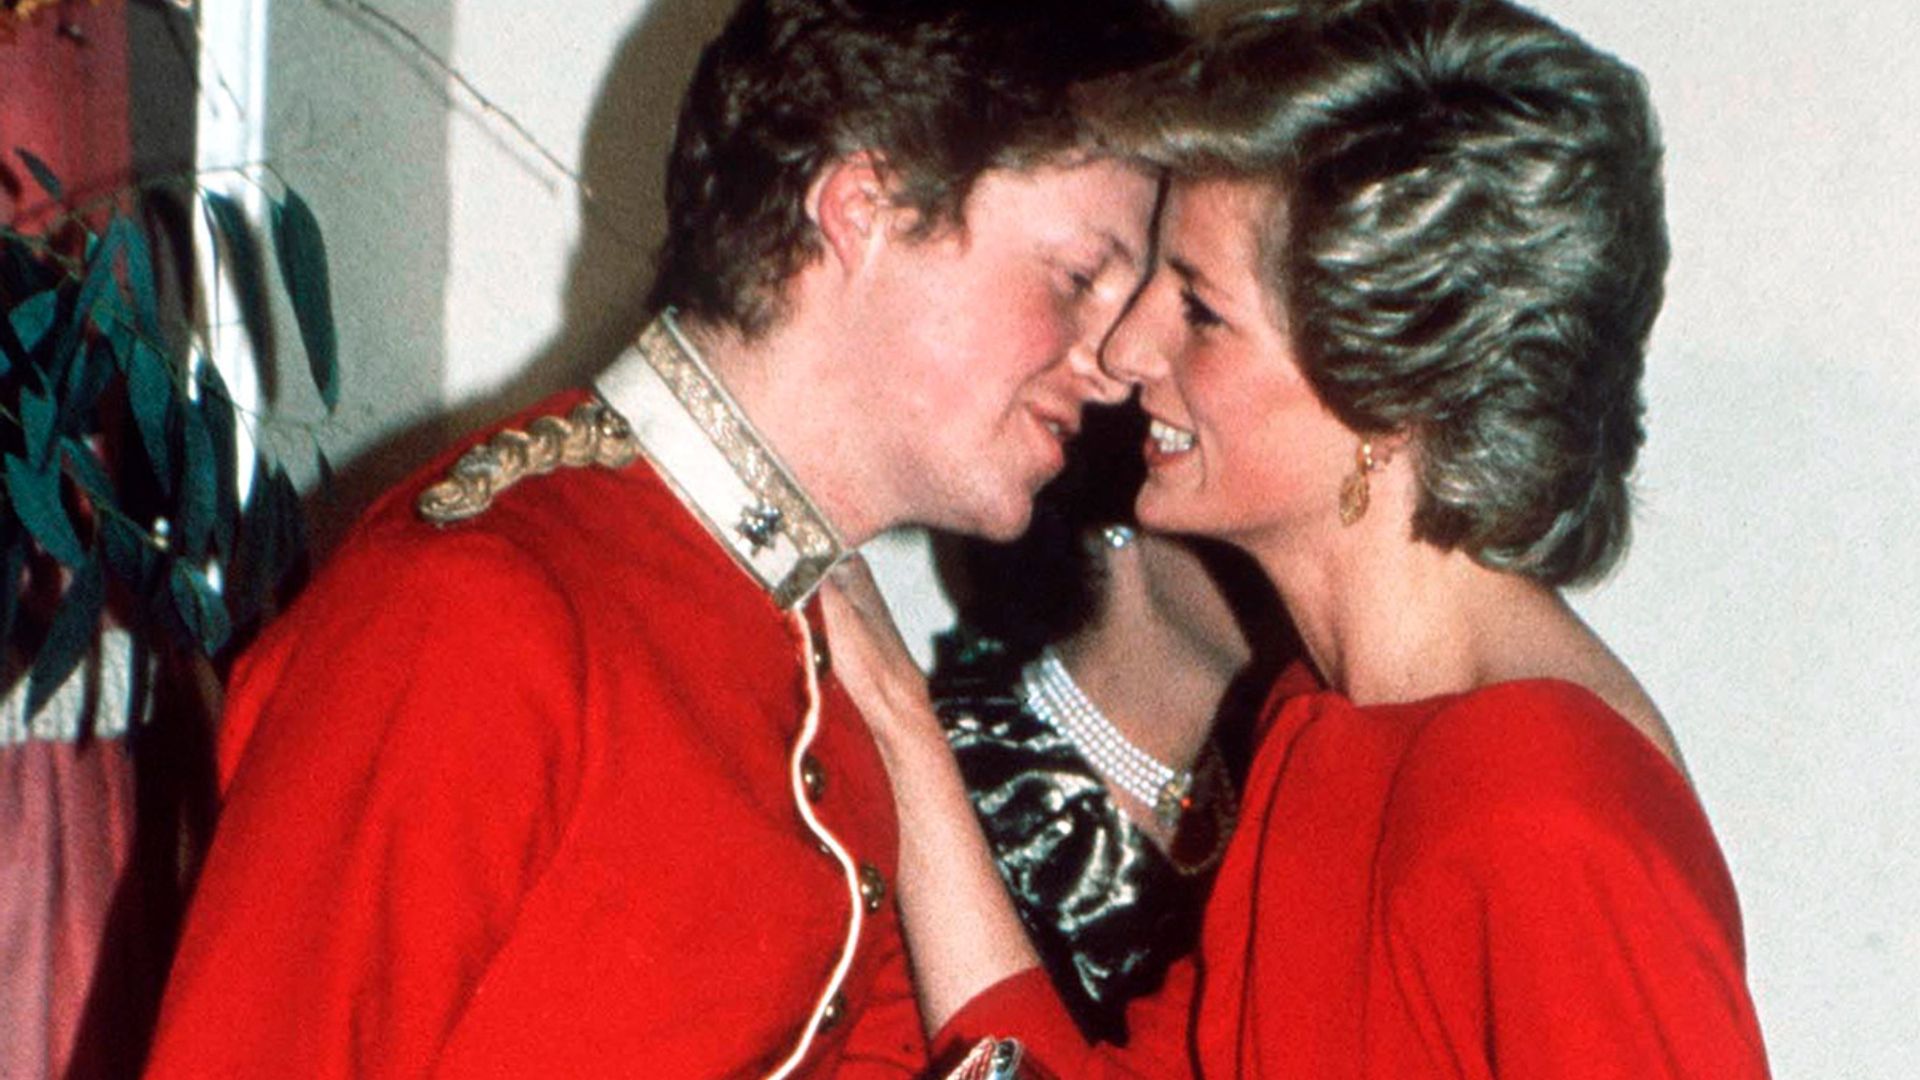 Princess Diana's brother Charles Spencer shares rare photo of his sibling's gravestone